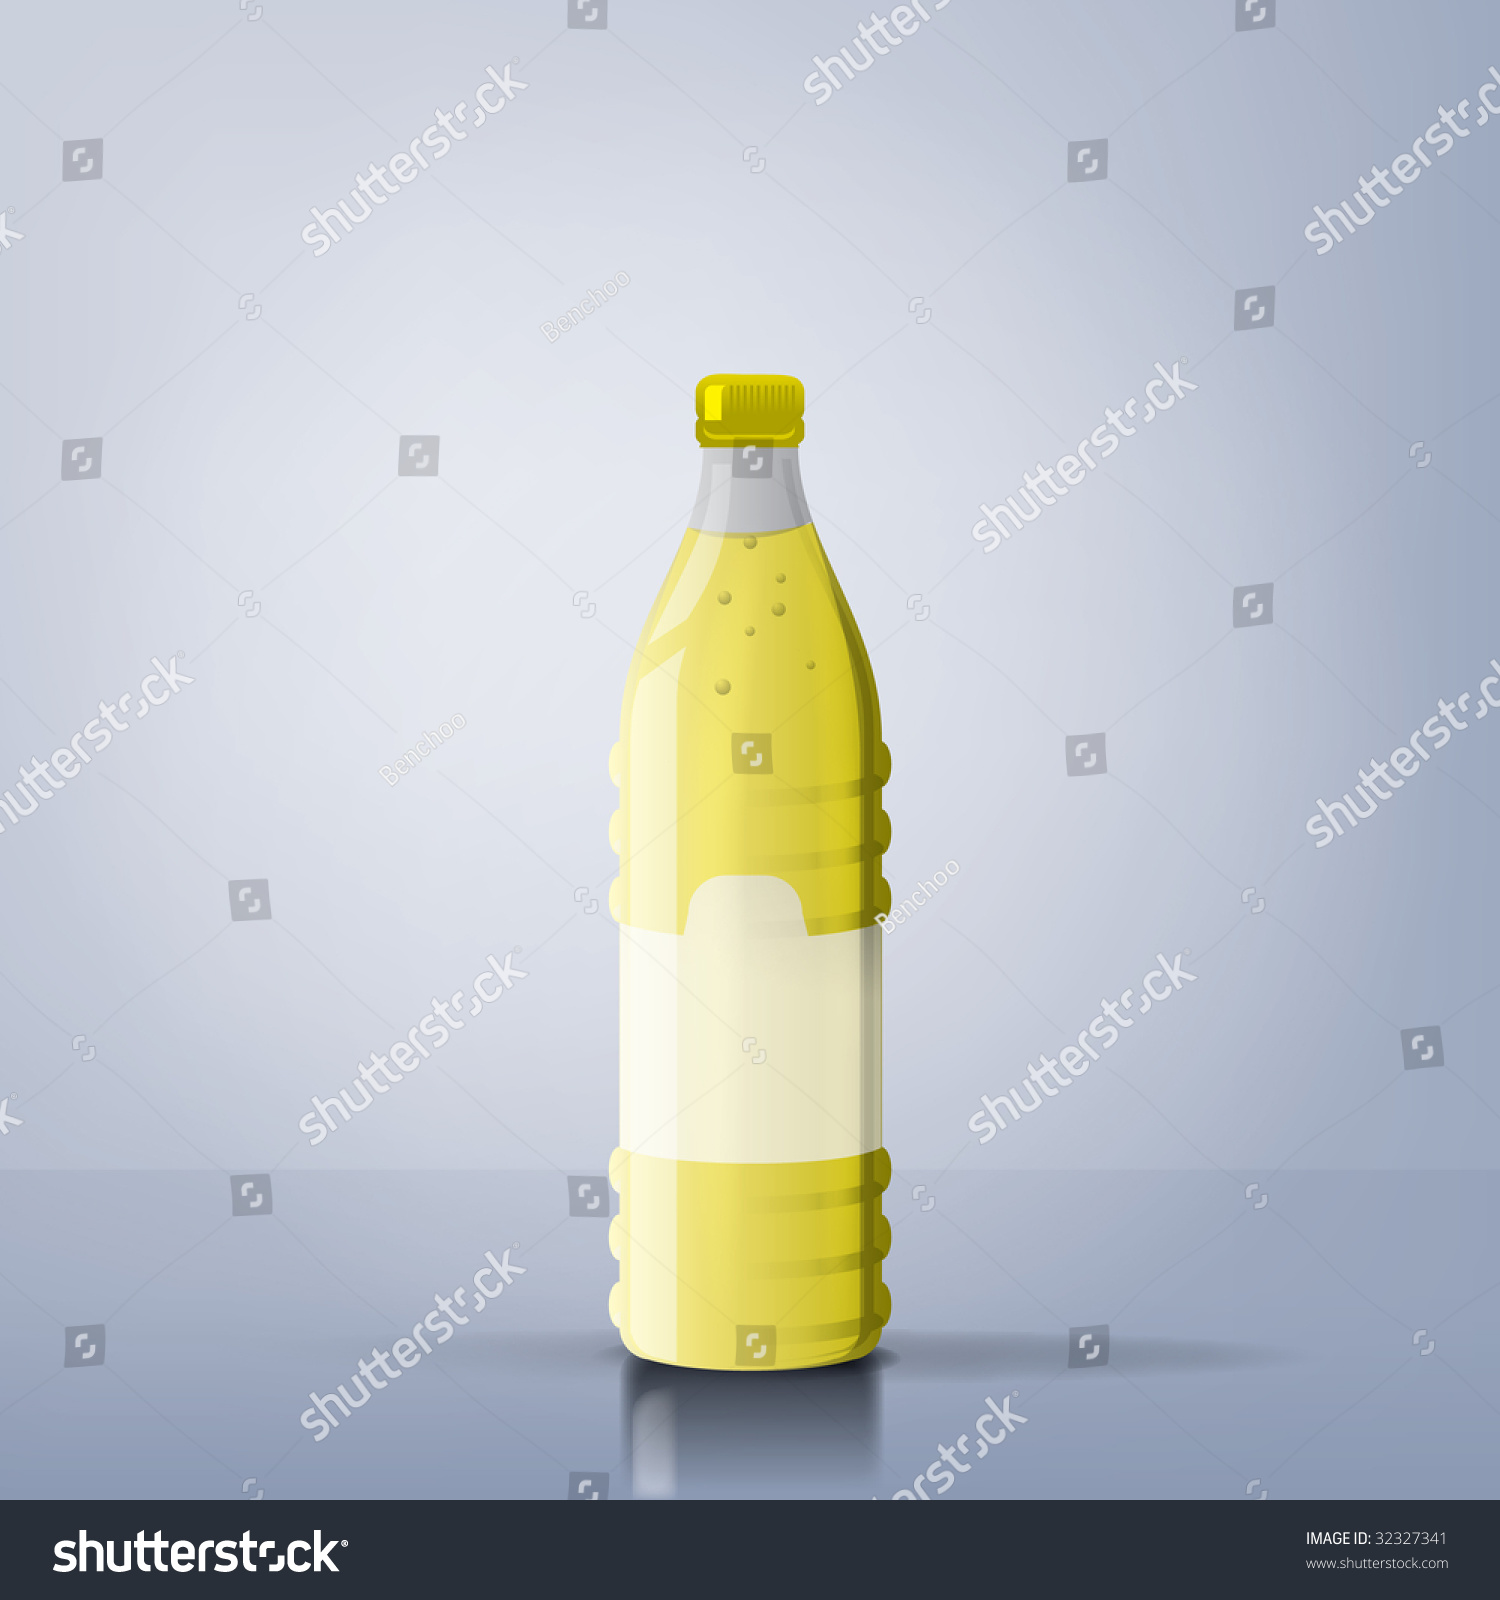 Download Illustration Yellow Juice Bottle Reflexions Stock Vector Royalty Free 32327341 Yellowimages Mockups